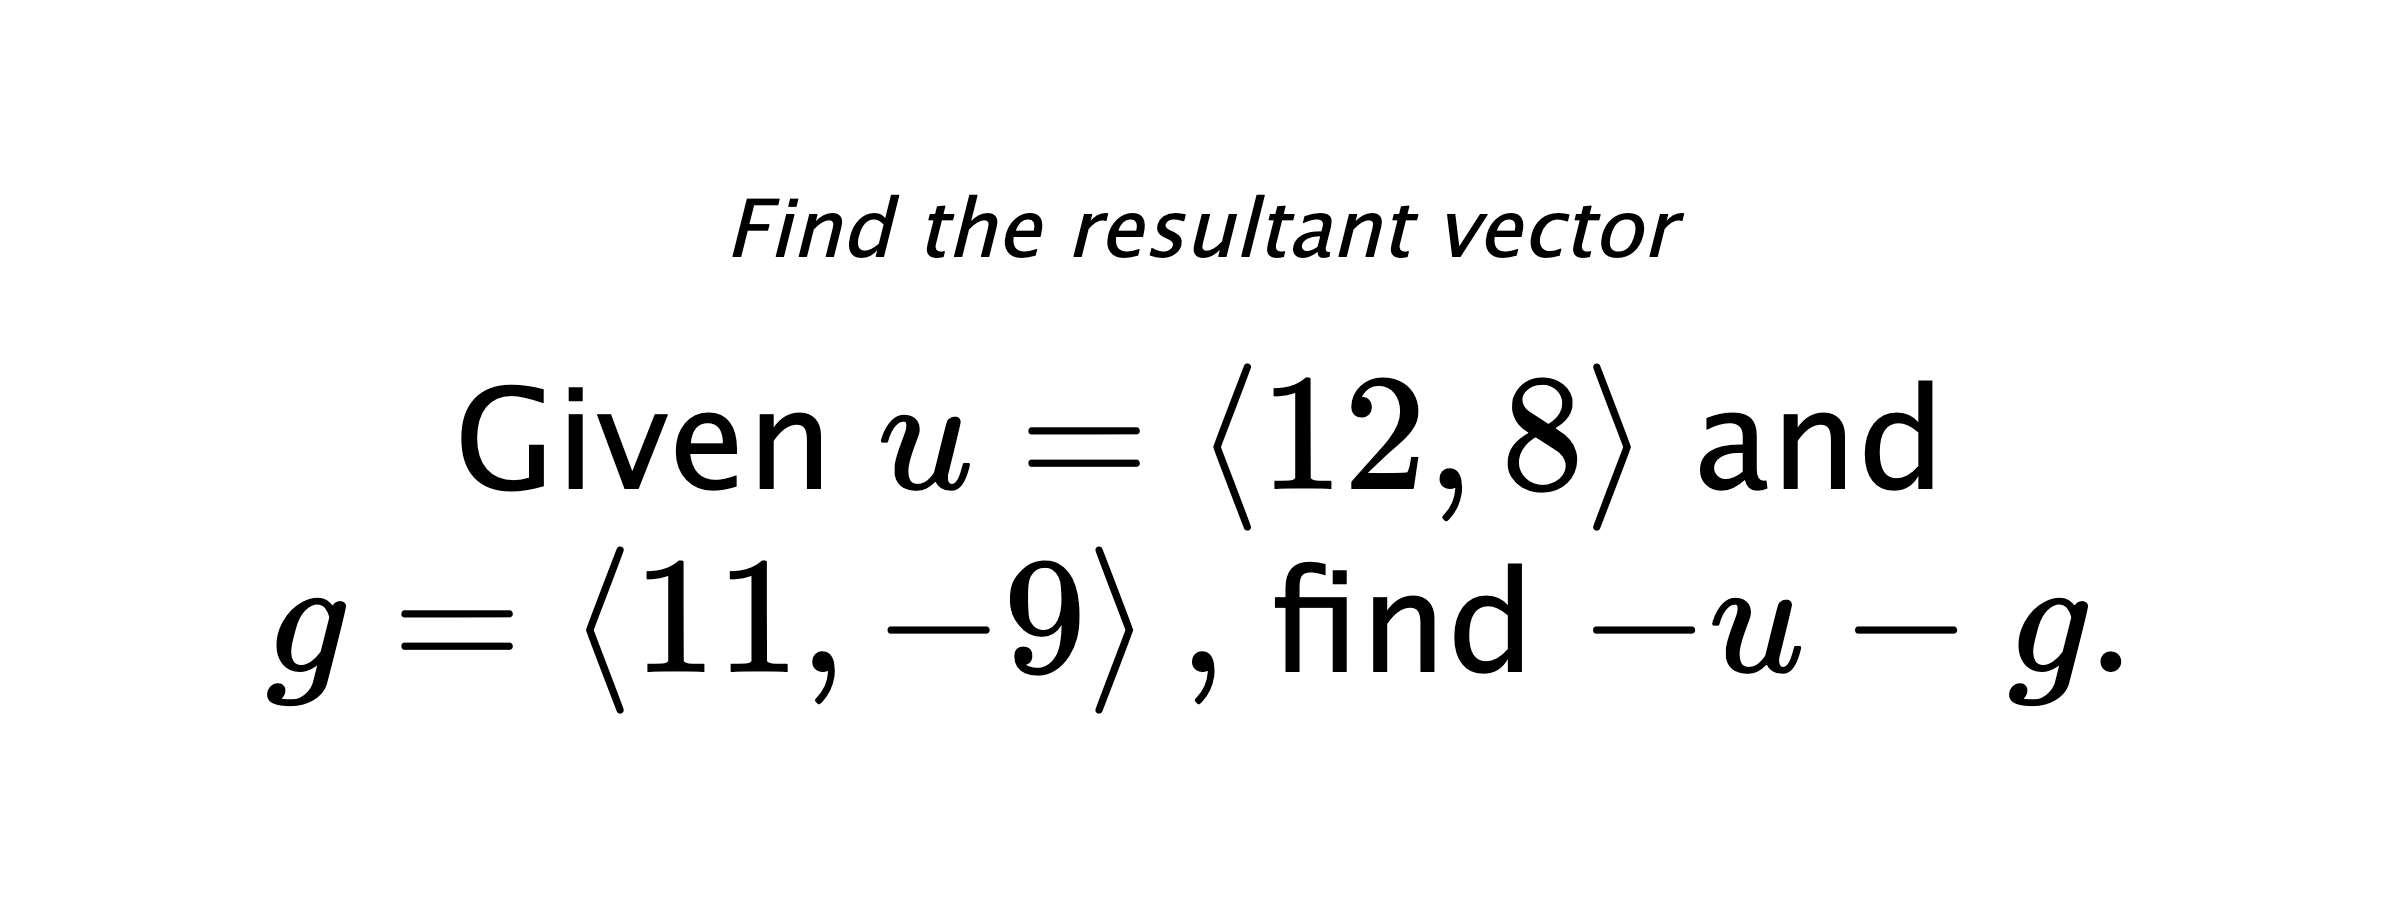 Find the resultant vector Given $ u = \left< 12,8 \right> $ and $ g = \left< 11,-9 \right> ,$ find $ -u-g .$